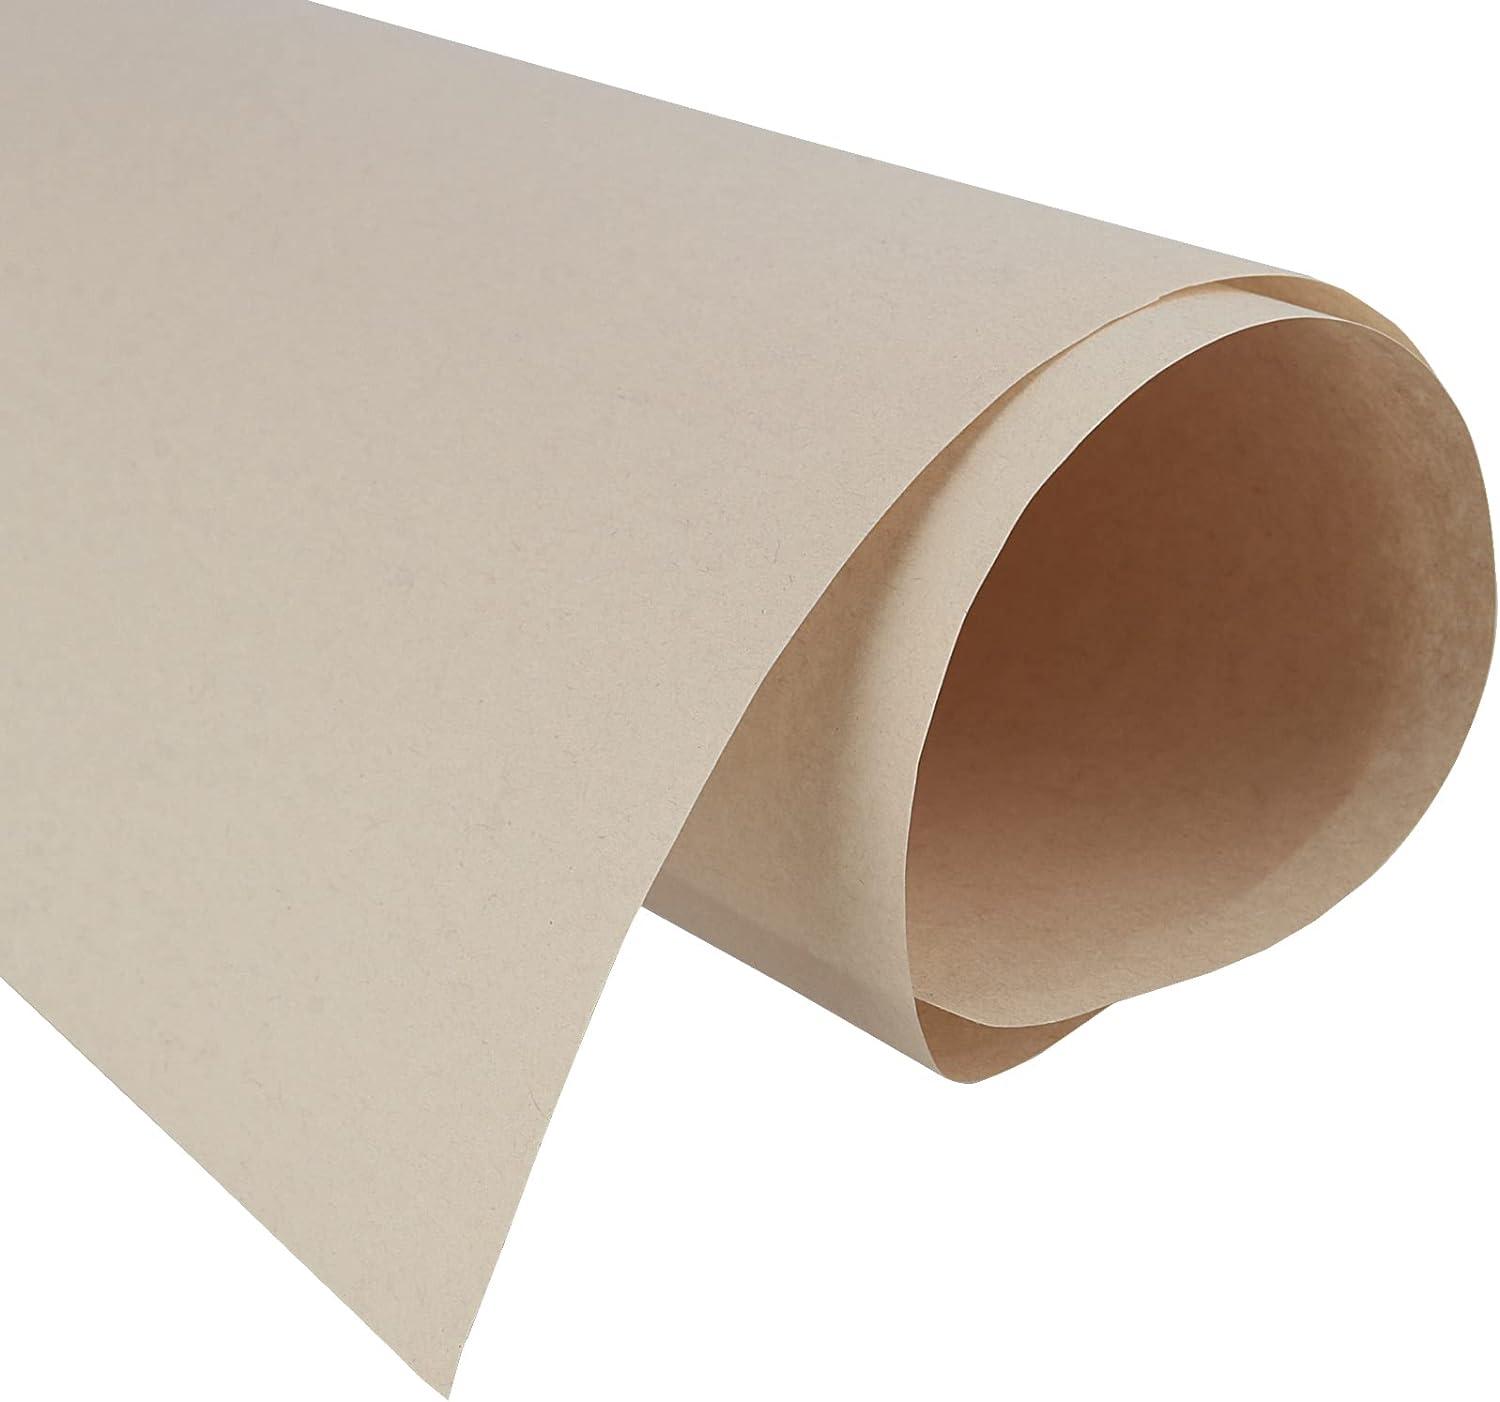 Packing Paper: Sheets